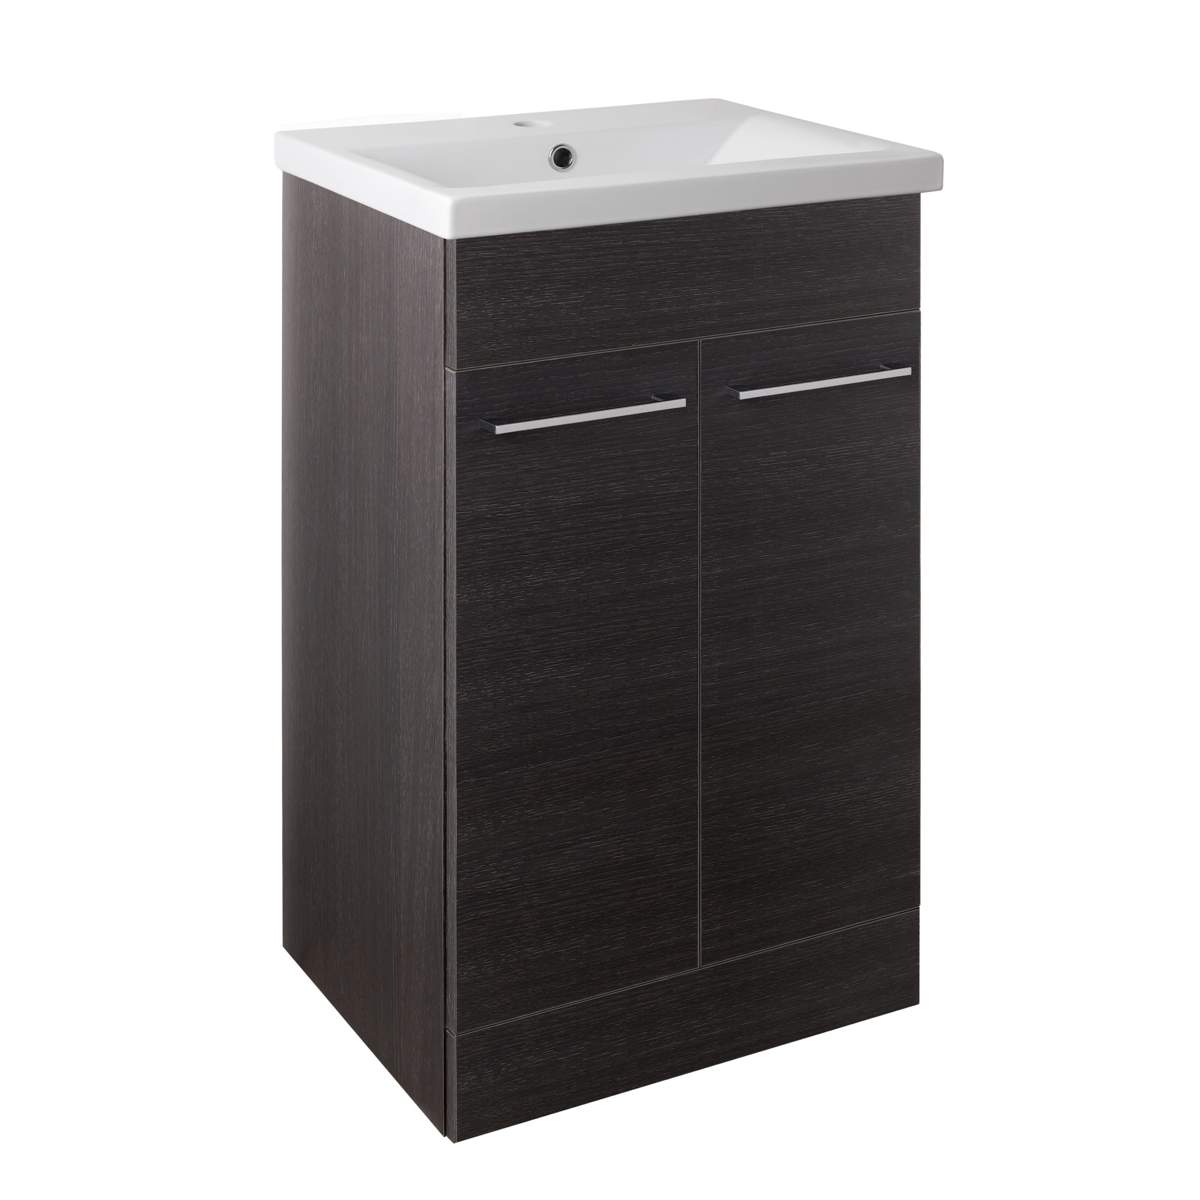 JTP Pace Units 500mm Floor Standing Unit with Doors and Basin in Black